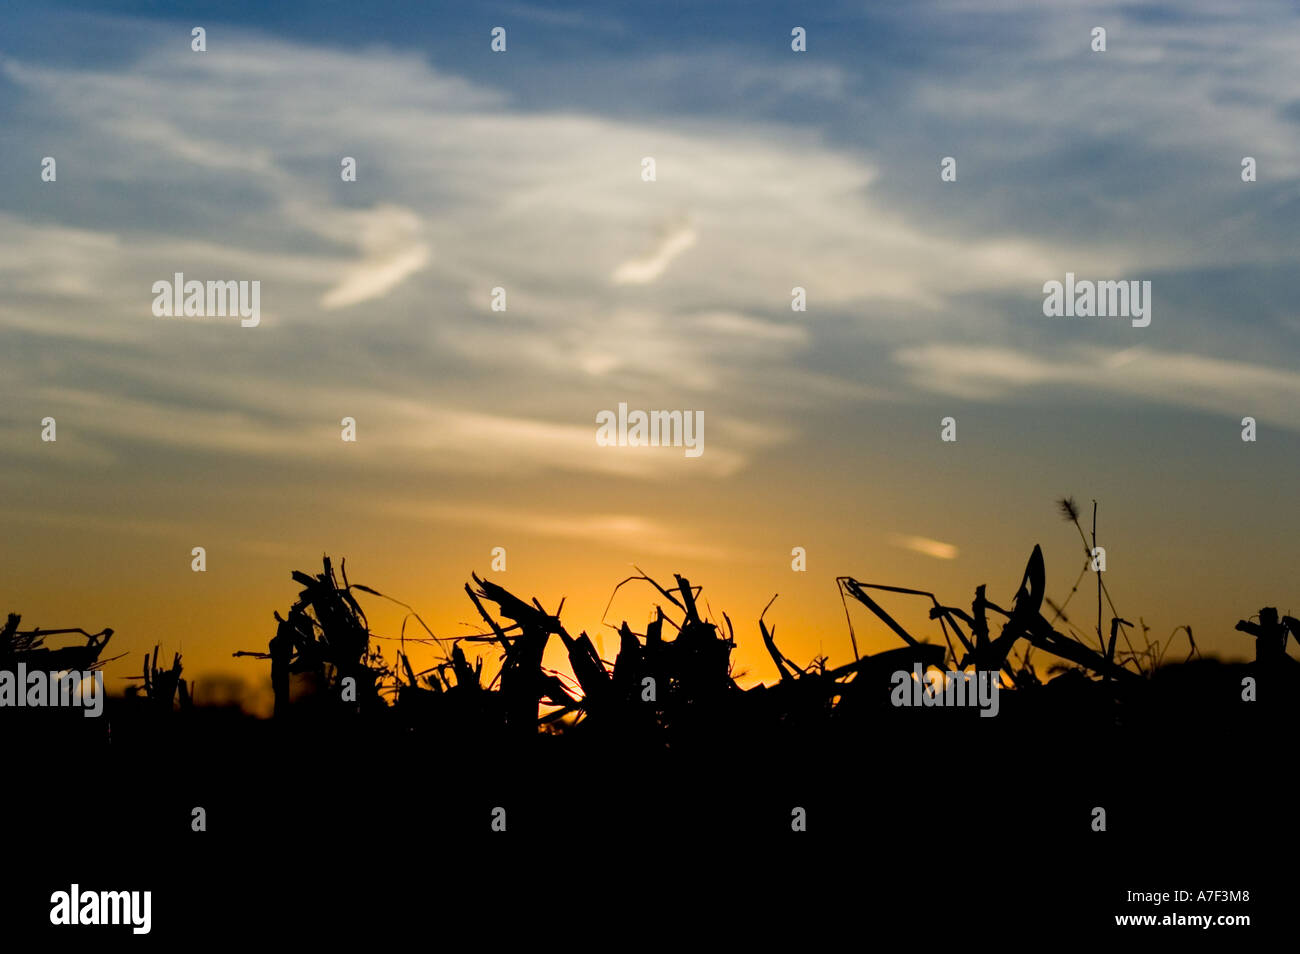 Stock photo of harvested corn field in autumn during sunset The corn stalks are silhouetted against the setting sun Stock Photo